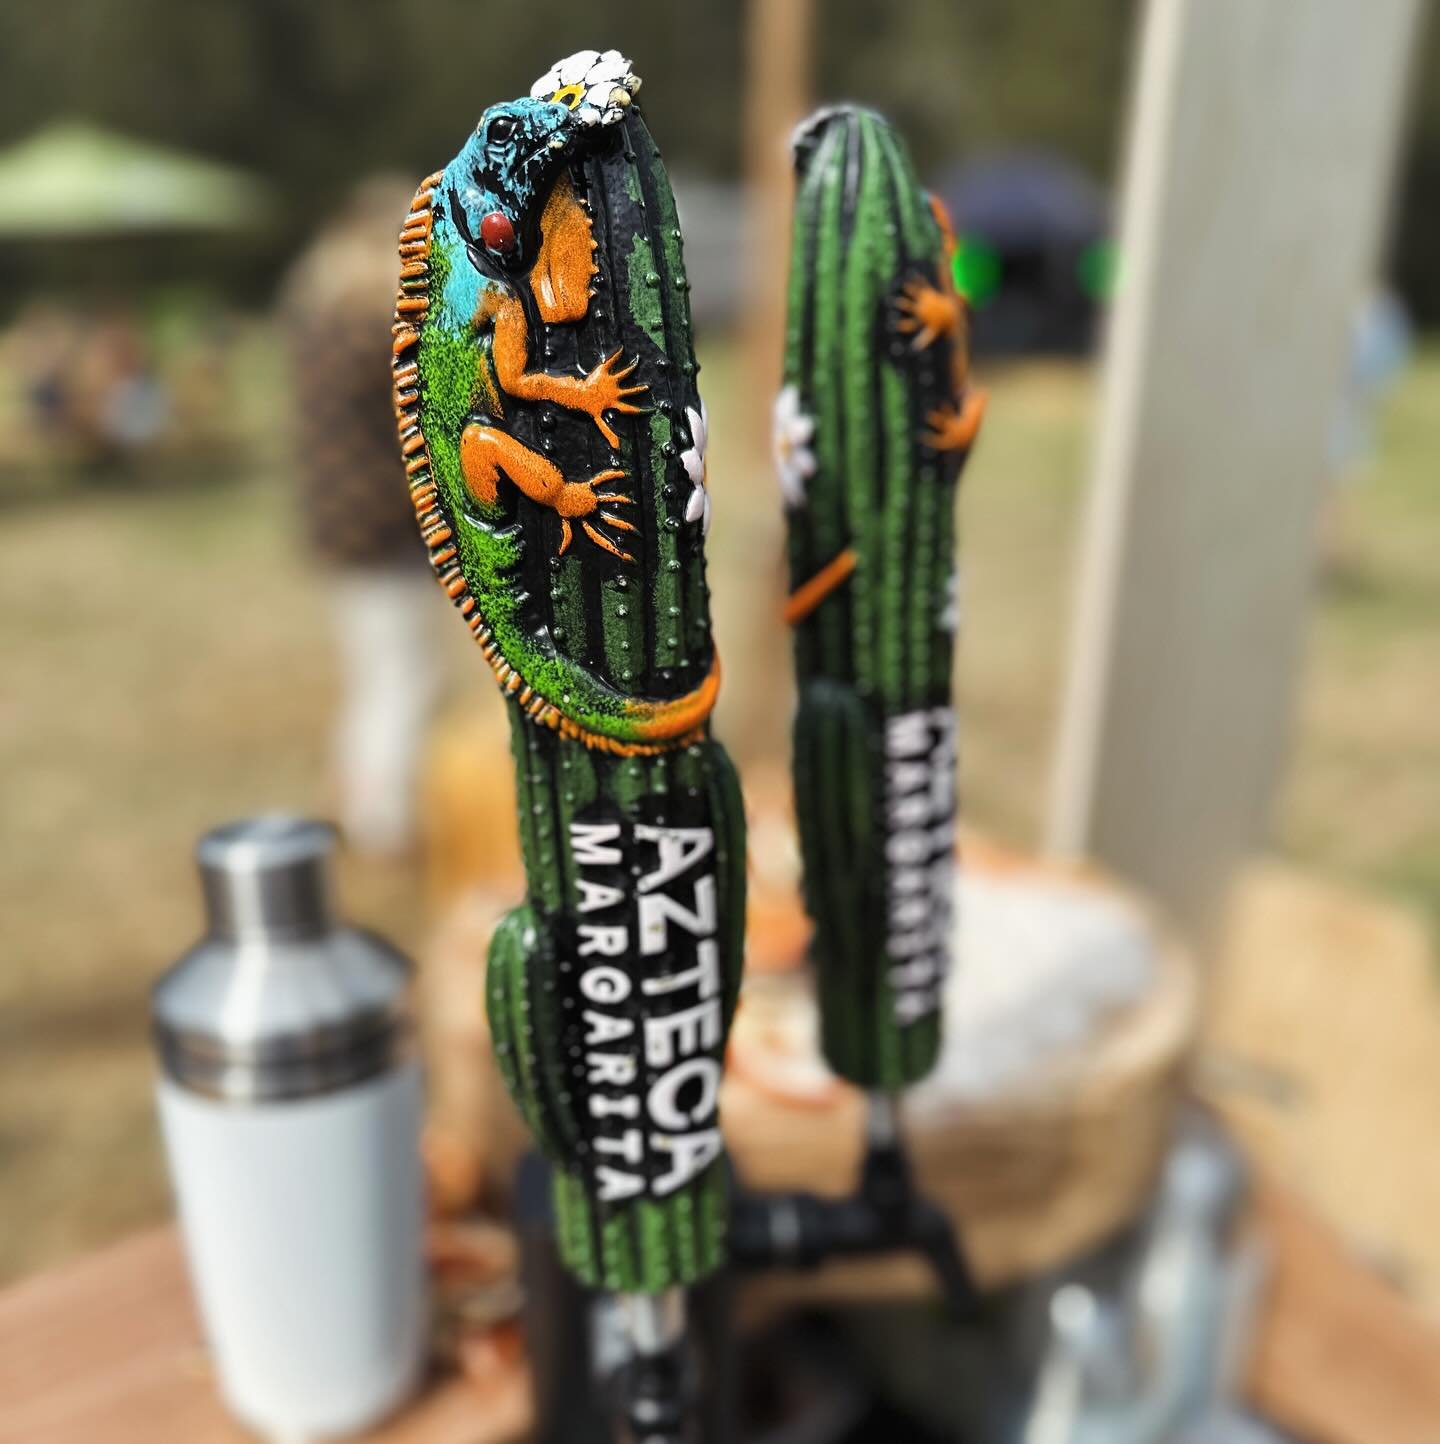 Your Favourite Margs
ON TAP 🚰
May the Feel Good Liquid flow 

#byronevents #byronweddings #byronbay #madeinbyron #saltymargs #taphandles #taphandle #beertaps #margs #margaritalife #inspiredbymexico